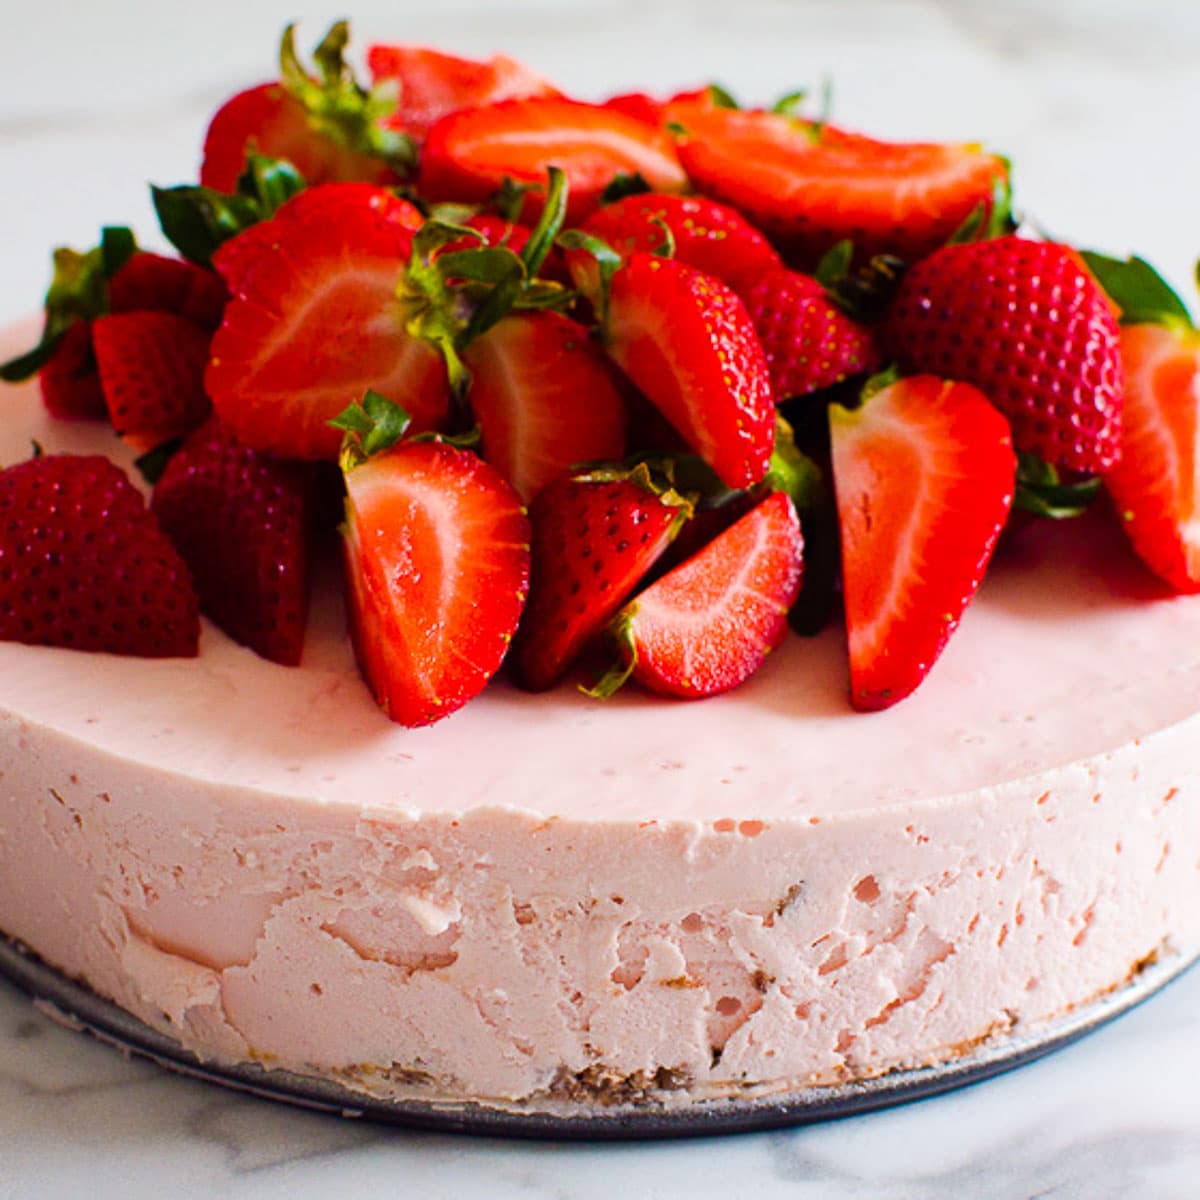 Healthy No Bake Strawberry Cheesecake (sweetened with maple syrup or honey) 